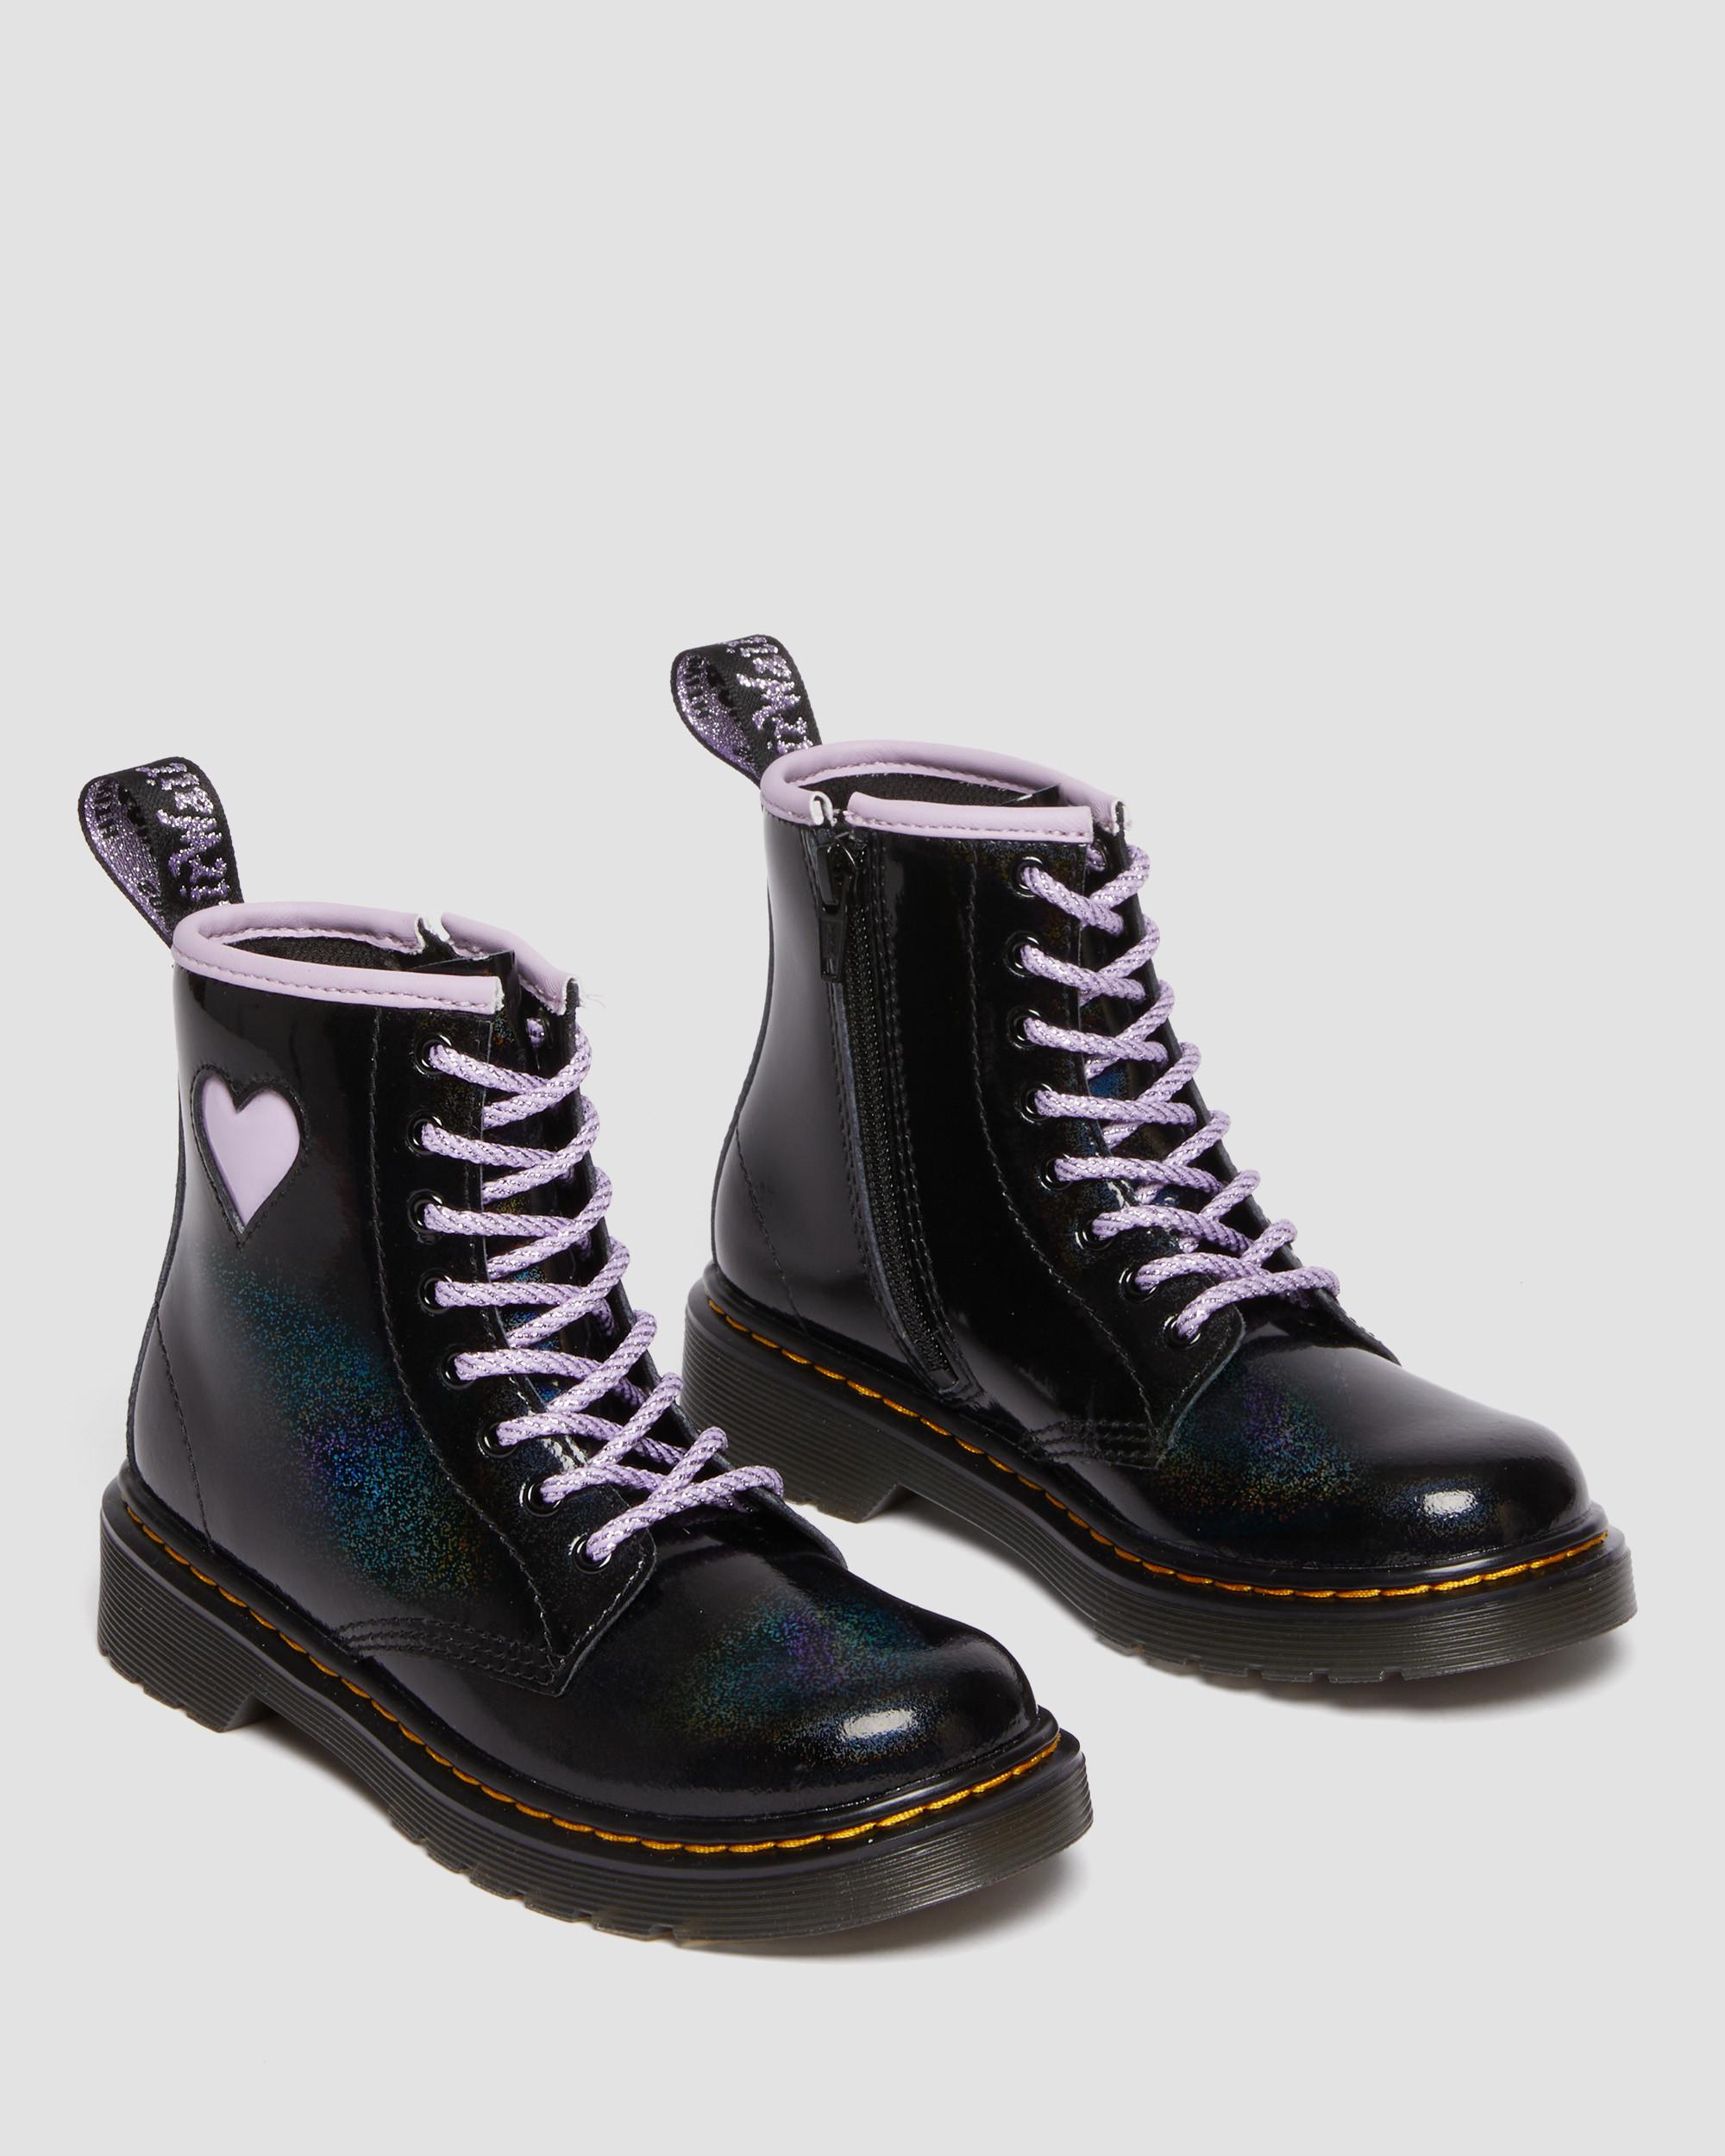 Lace in Junior 1460 | Black Boots Shimmer Heart Dr. Up Martens